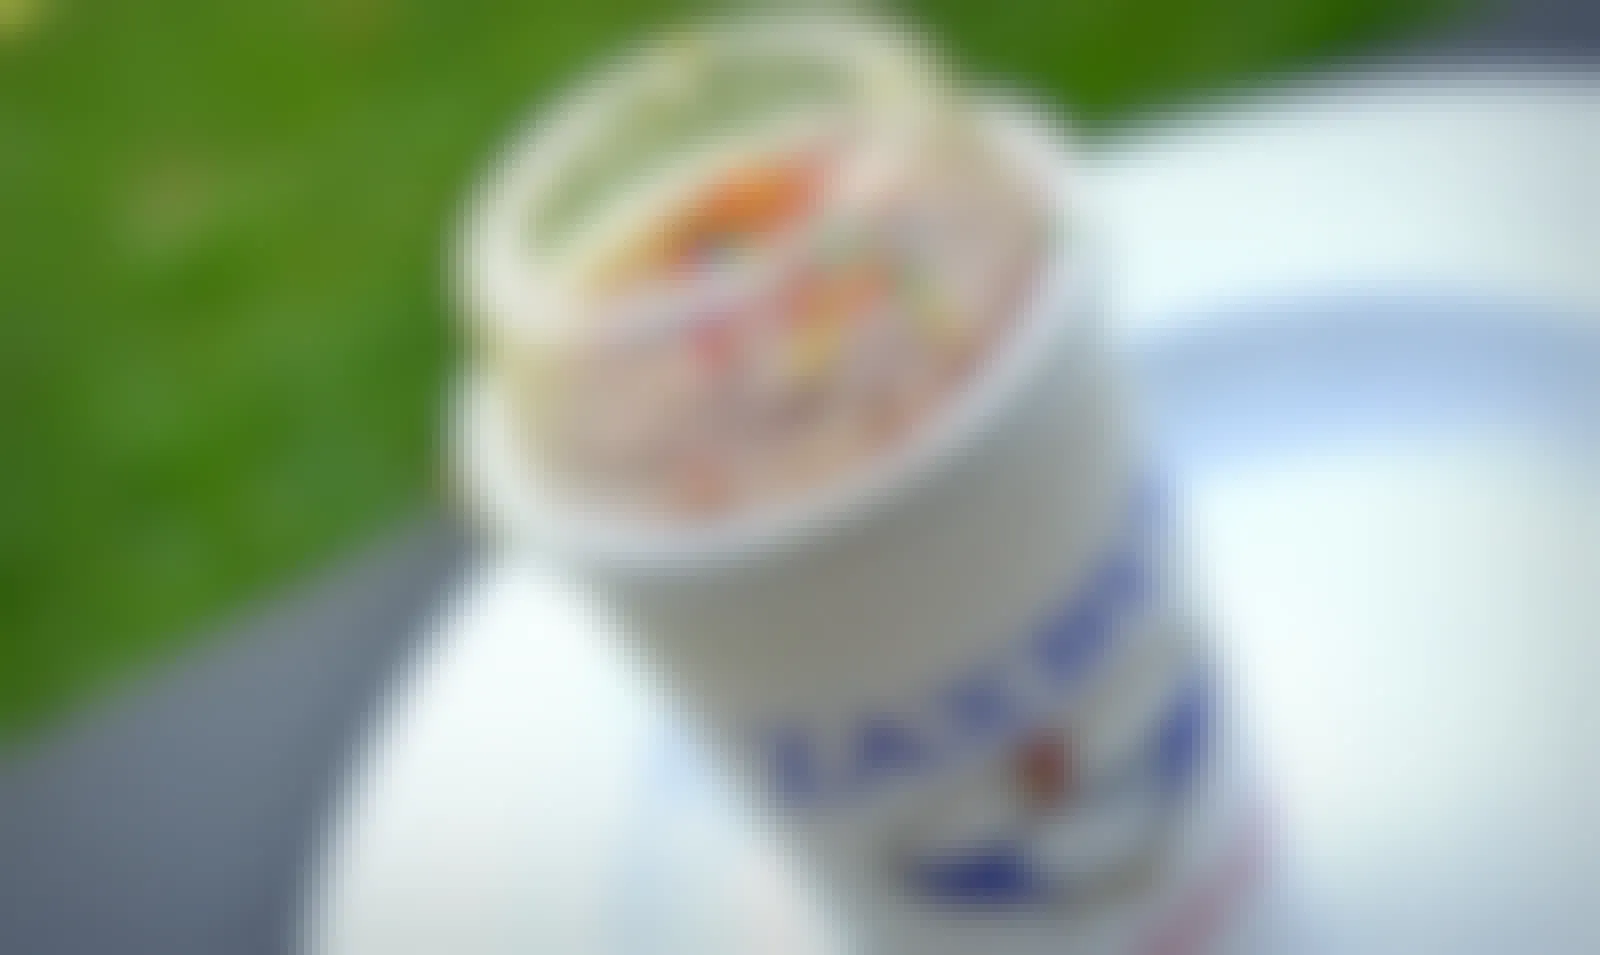 A Zaxby's milkshake with sprinkles on a table outside.